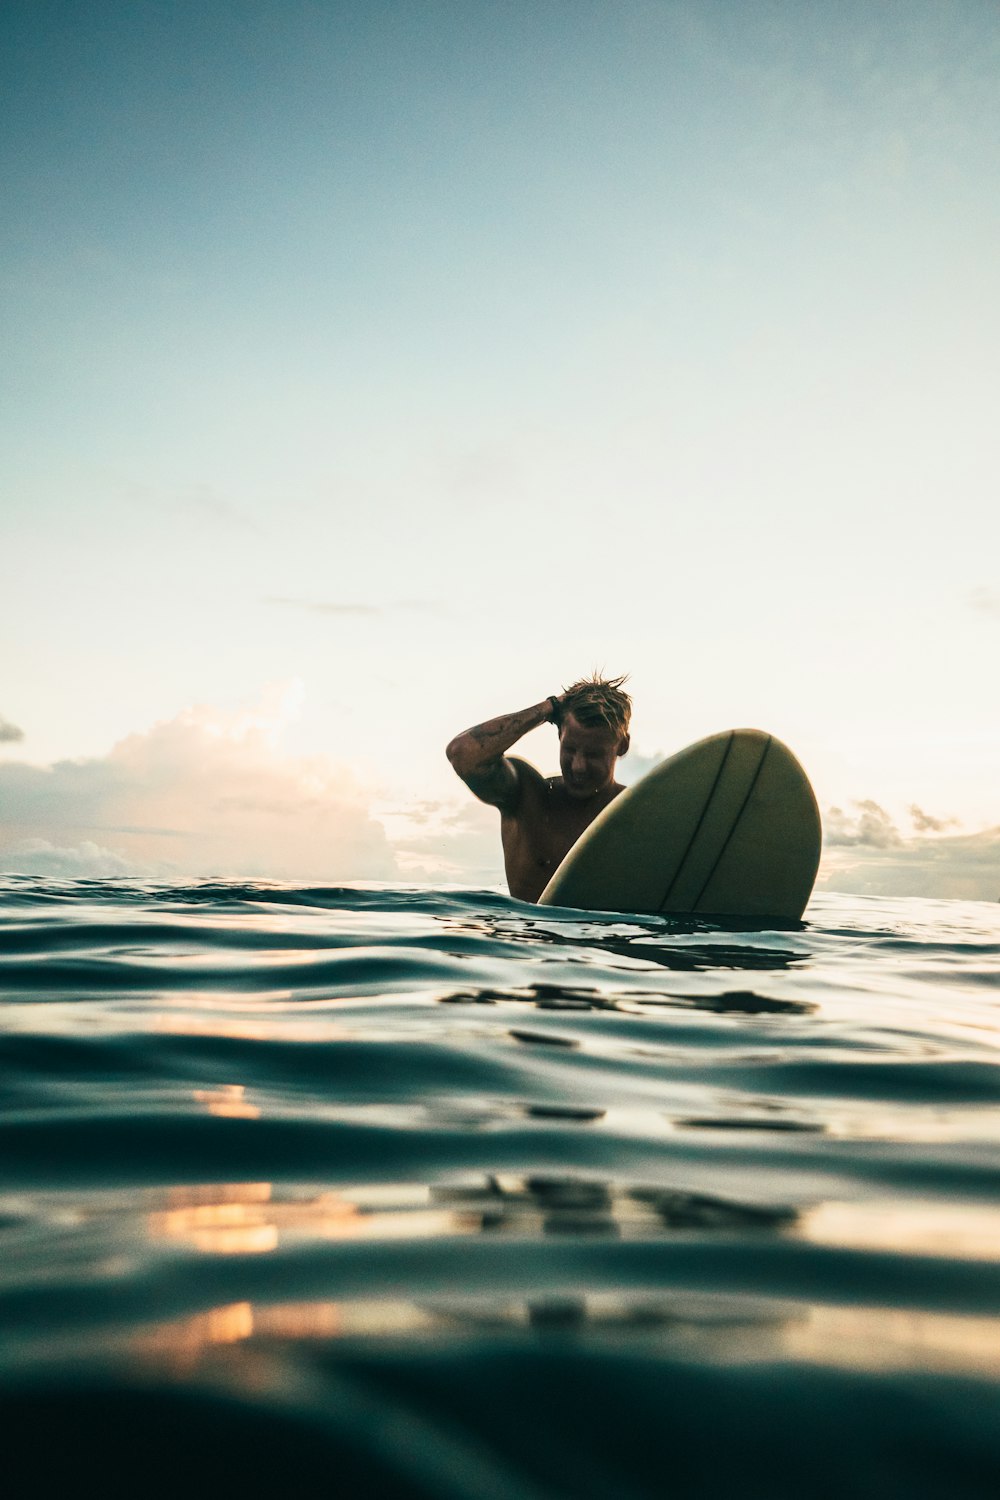 500 Surfing Pictures Hd Download Free Images On Unsplash